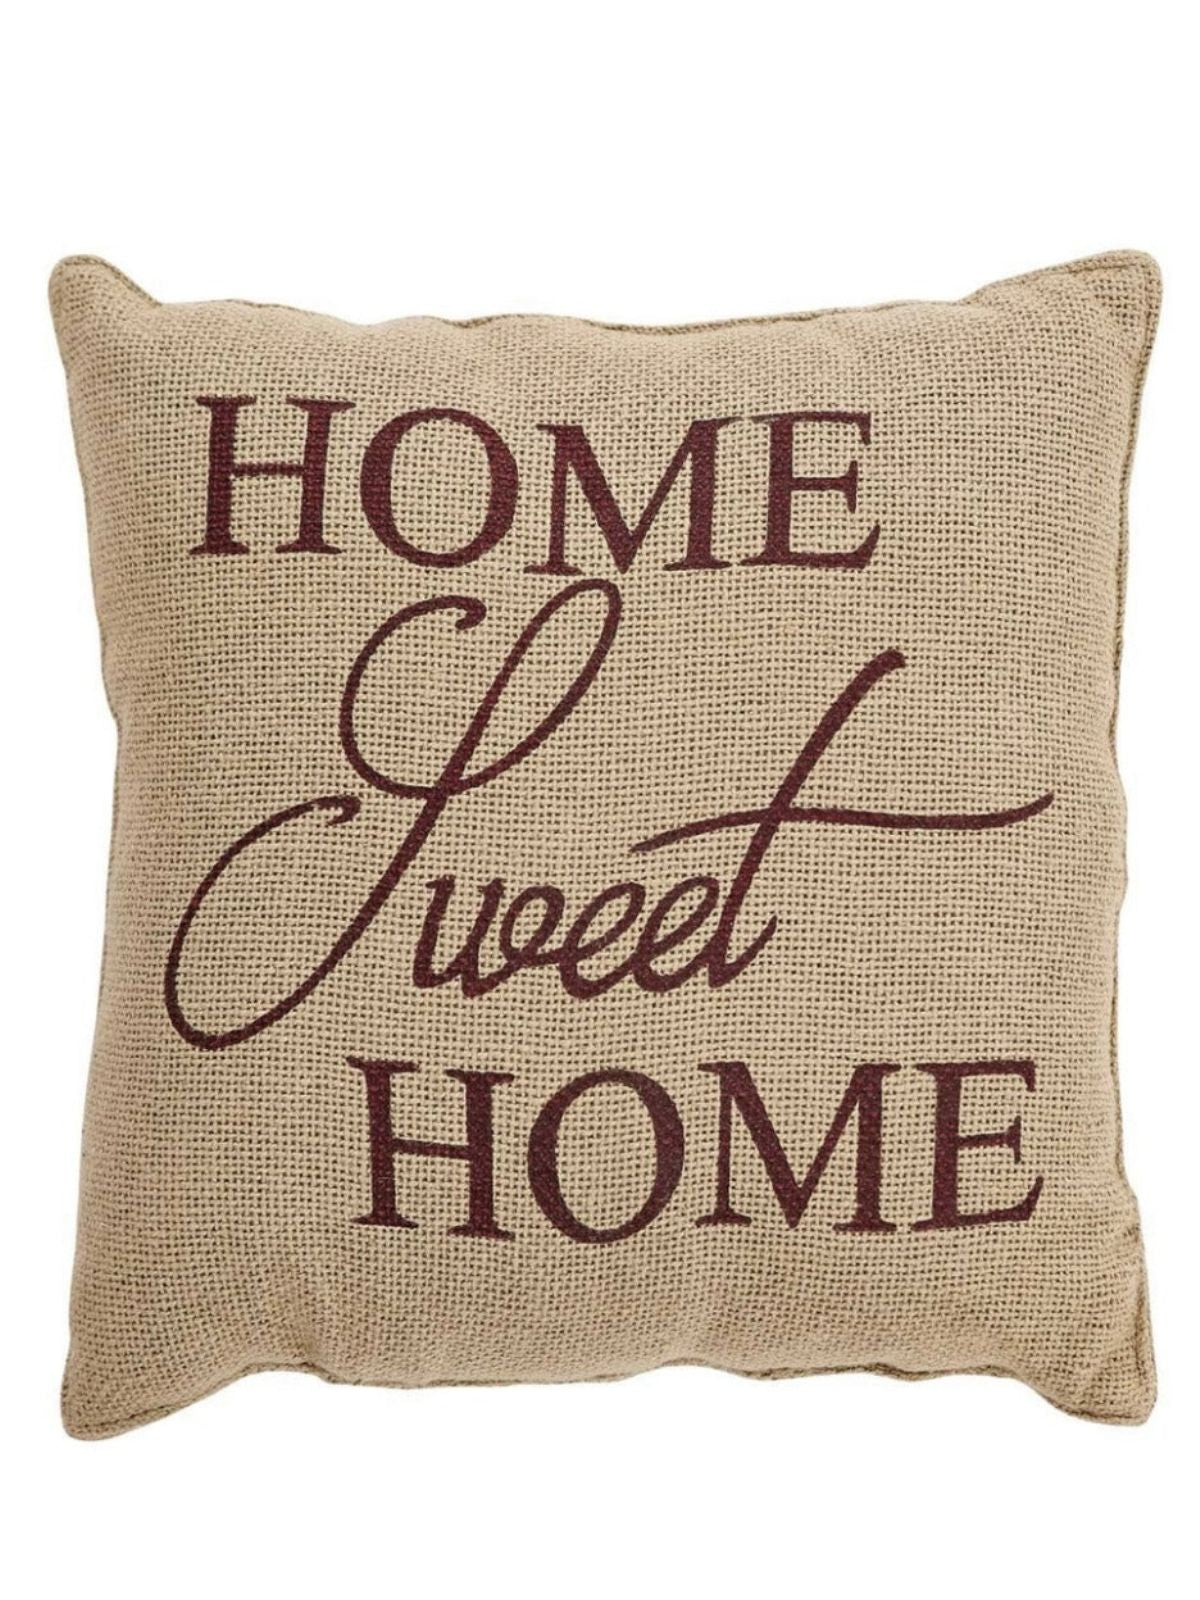 This cozy decorative pillow adds a touch of personal sentiment with a stencil that reads Home Sweet Home. Our soft cotton natural shade burlap provides the perfect background for the burgundy stencil quote. 